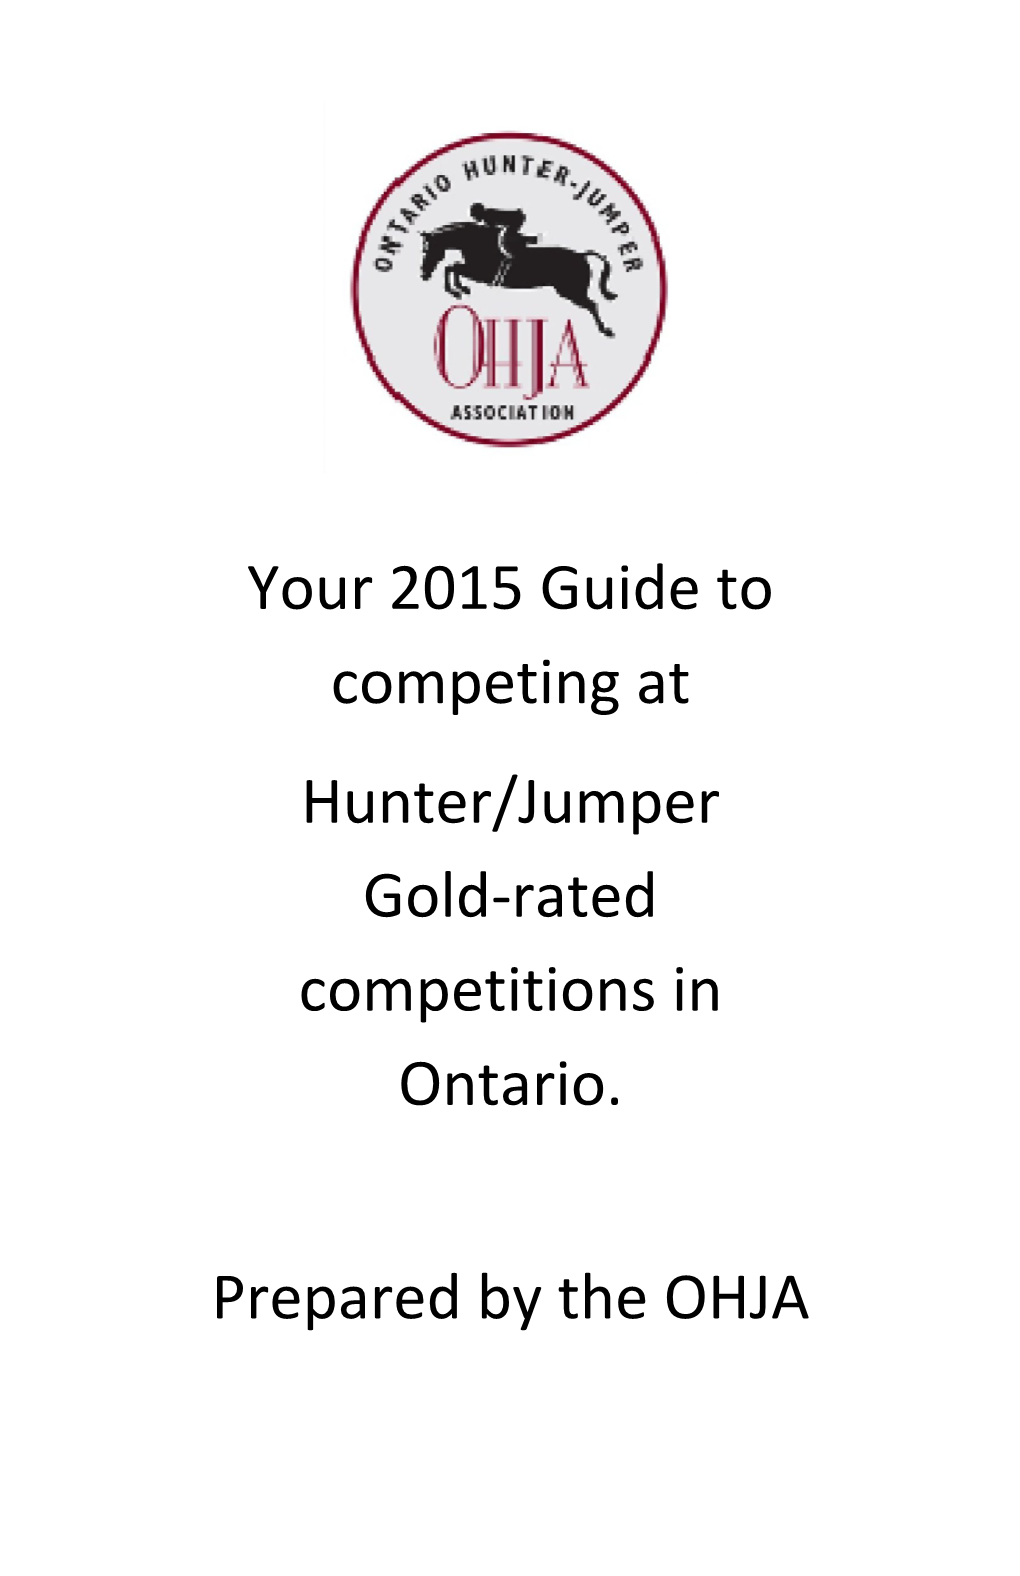 Your 2015 Guide to Competing at Hunter/Jumper Gold-Rated Competitions in Ontario